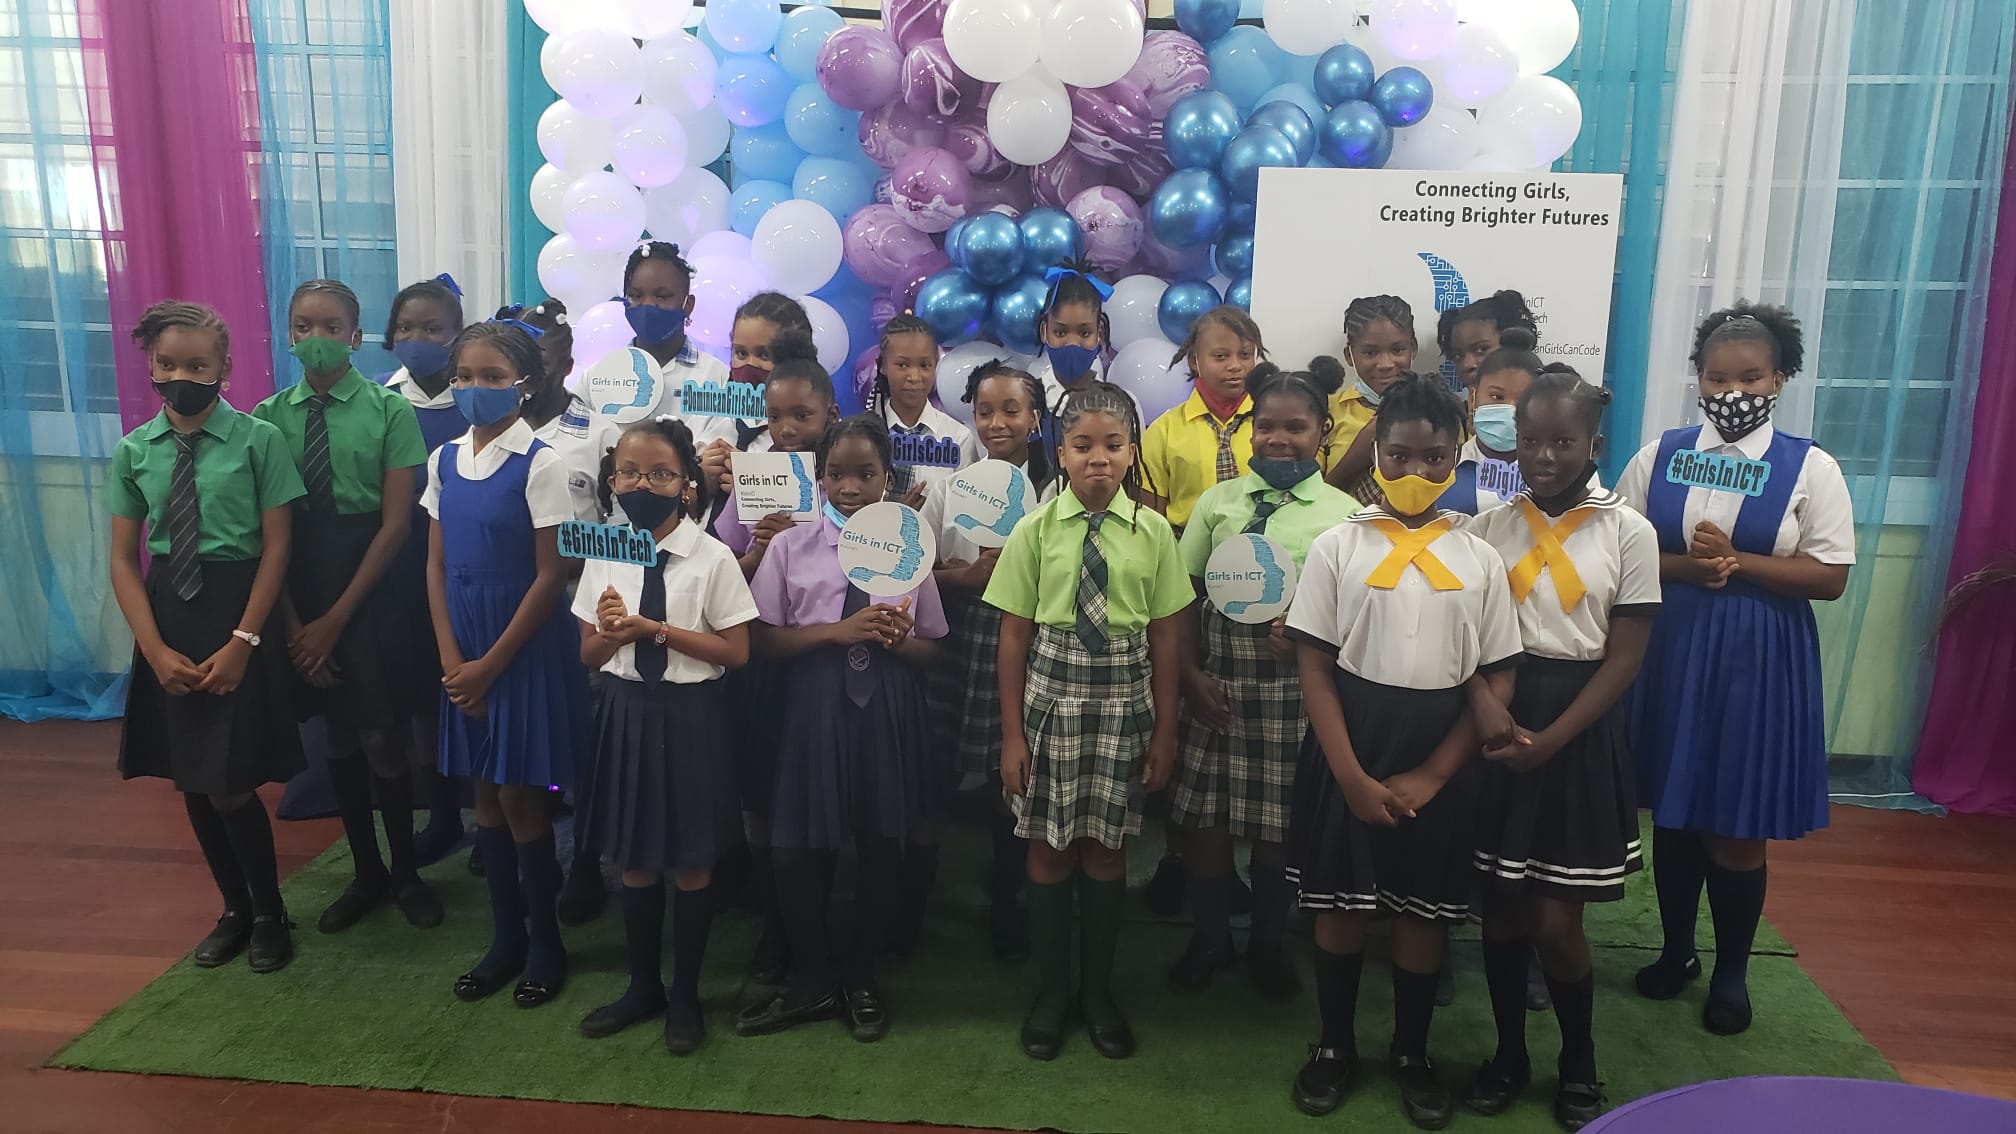 Girls Encouraged to Pursue Careers in ICT Fields